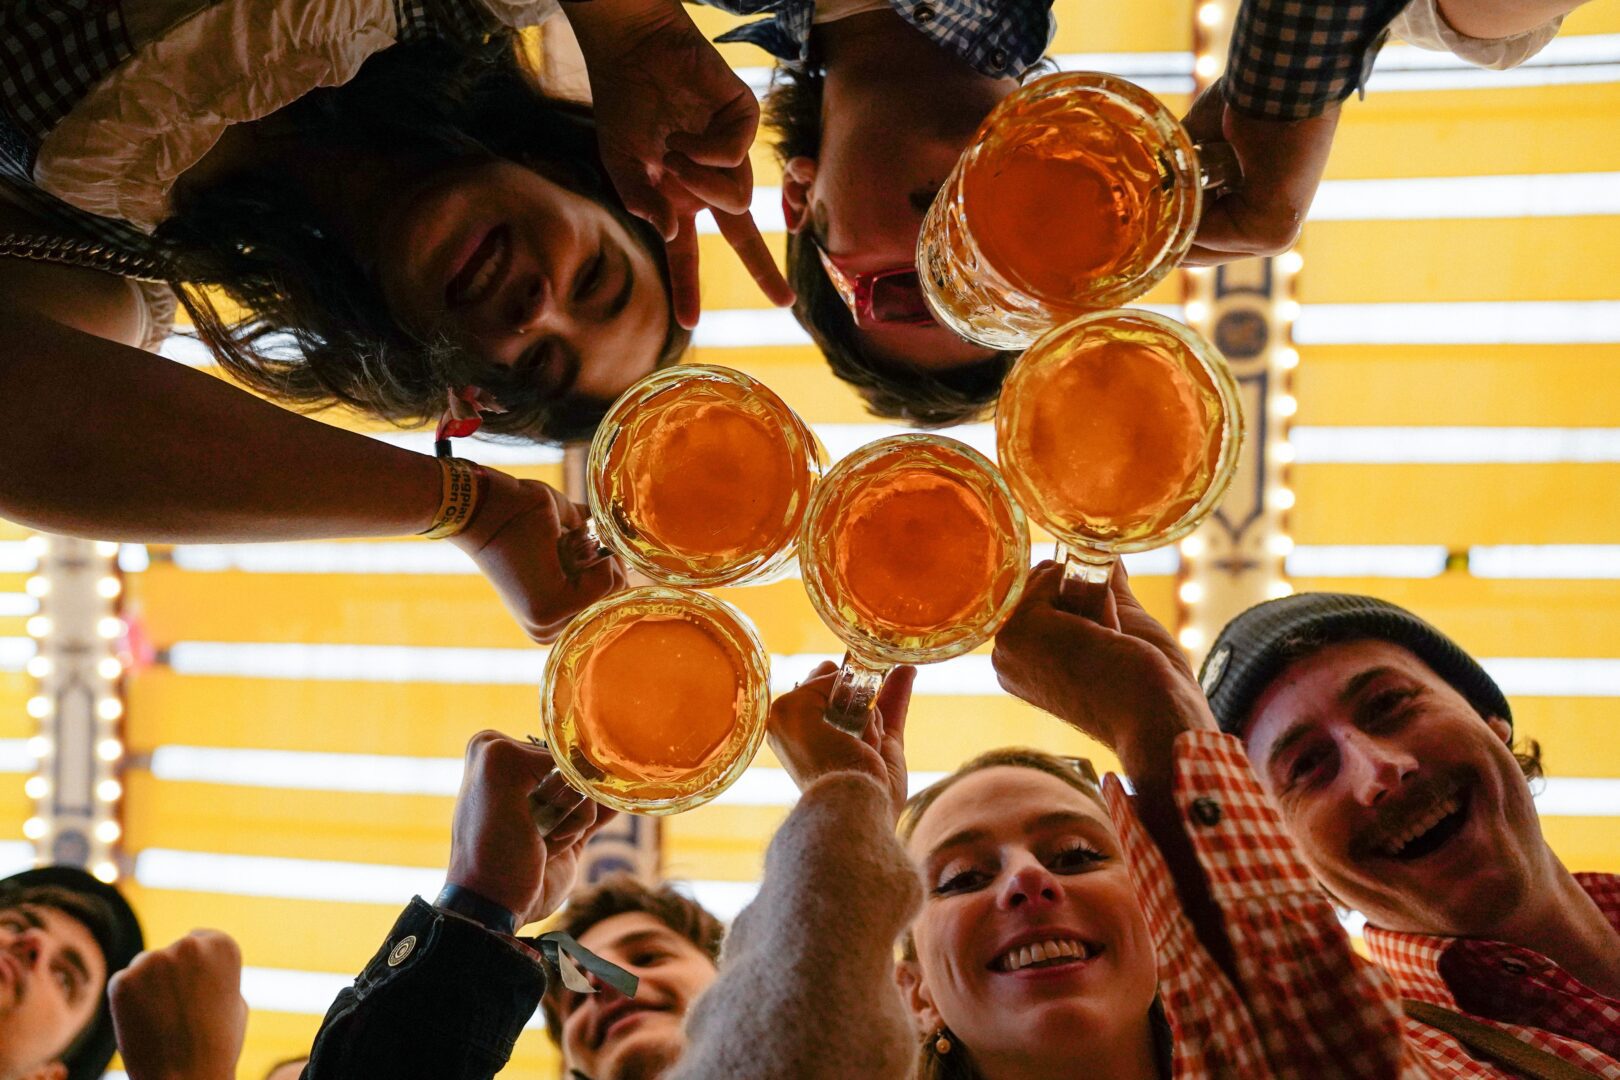 German Purity Laws: Do Oktoberfest Beers Give You Less Of A Hangover?